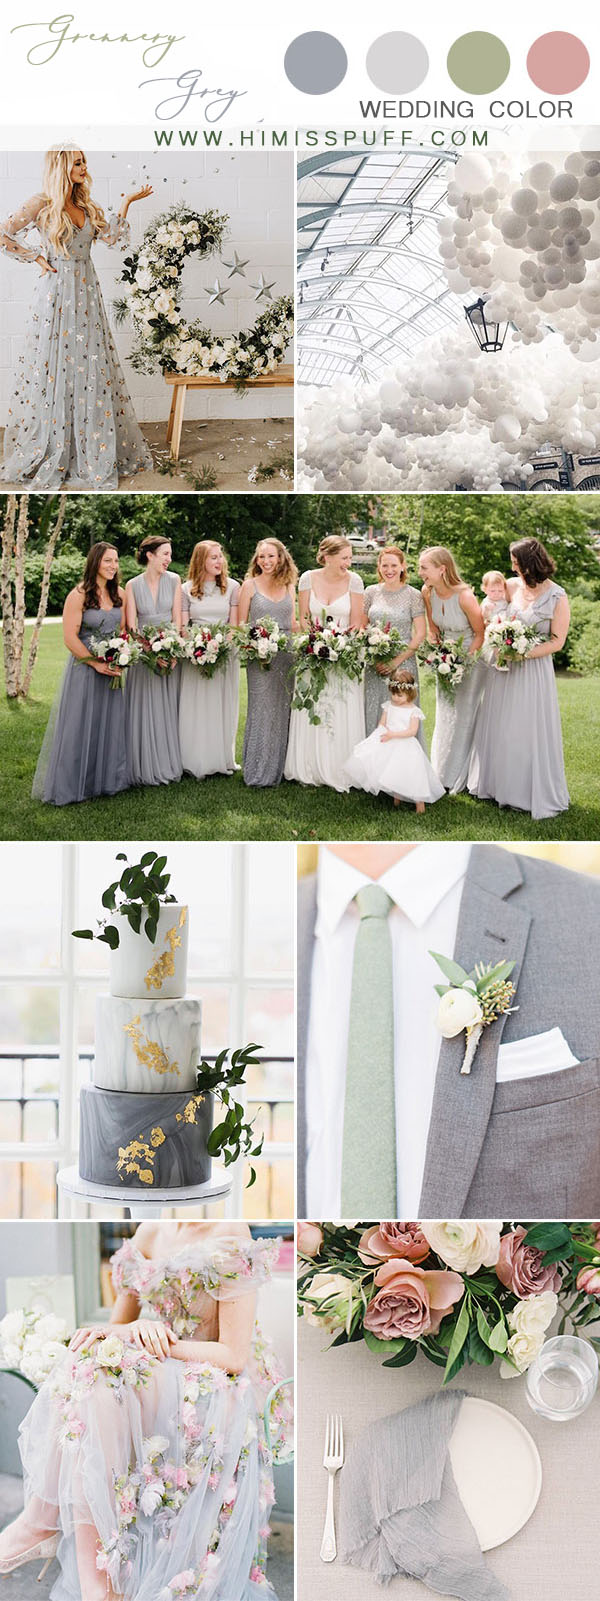 Gray mix and match bridesmaid dresses green and gray wedding color palette